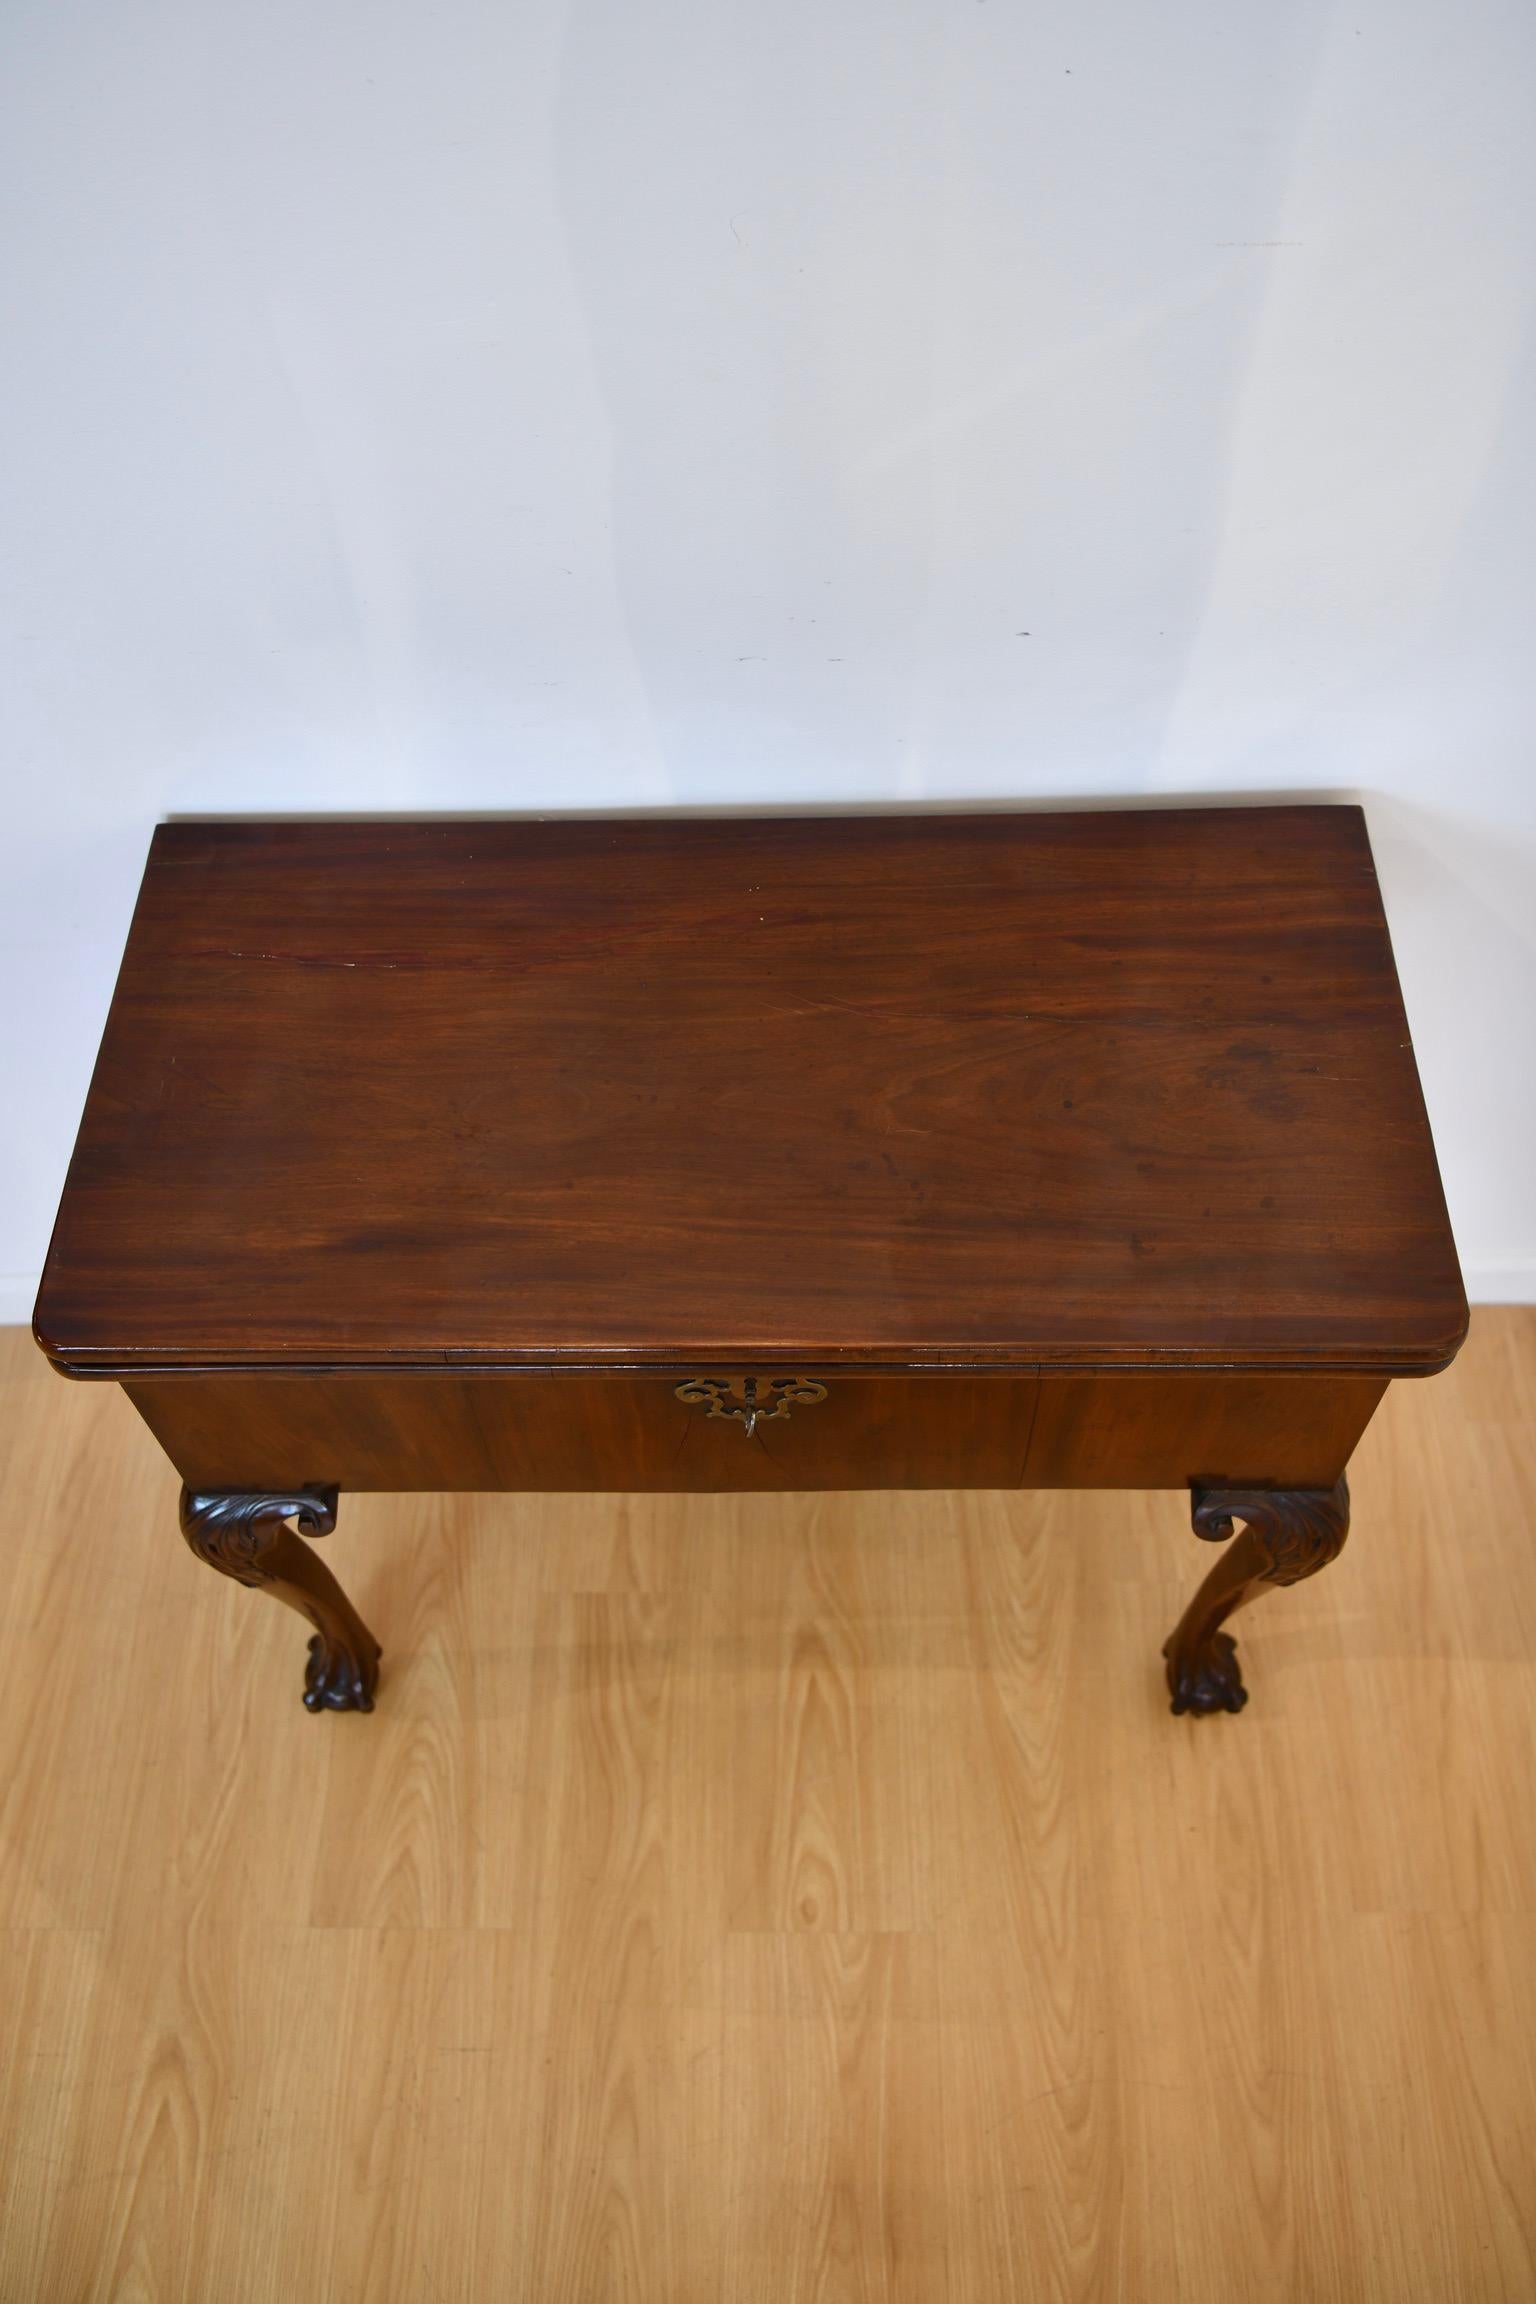 20th Century Georgian Revival Transforming Desk and Games Table For Sale